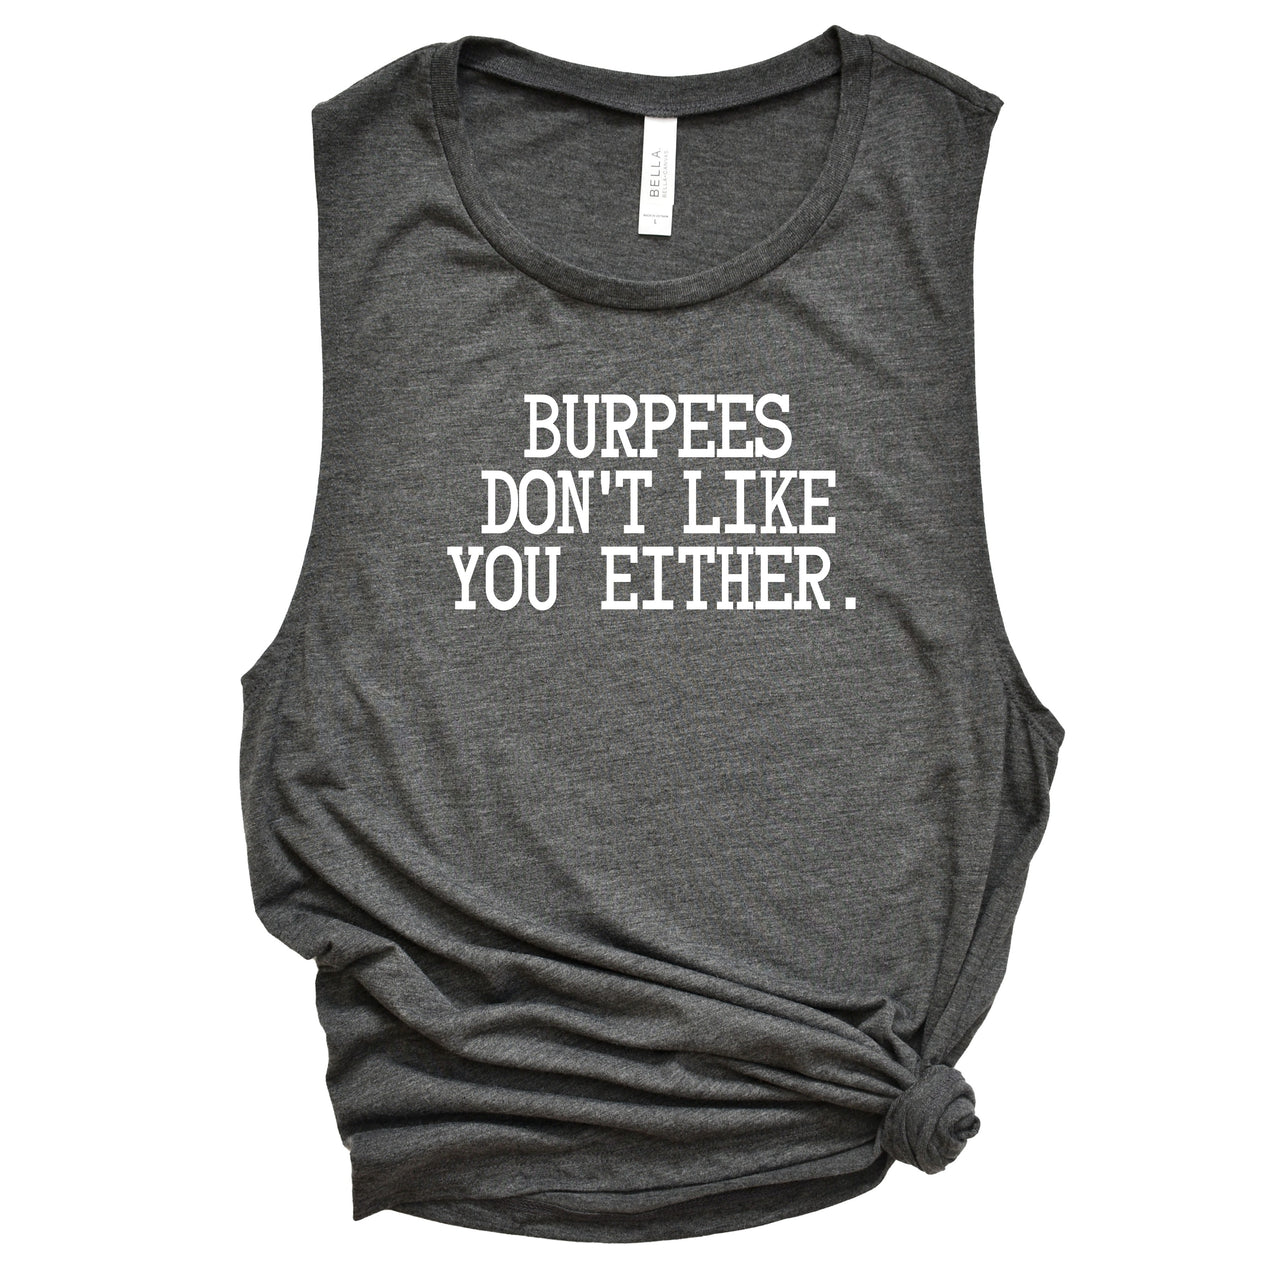 Burpees Don't Like You Either - Ladies Flowy Scoop Muscle Tank